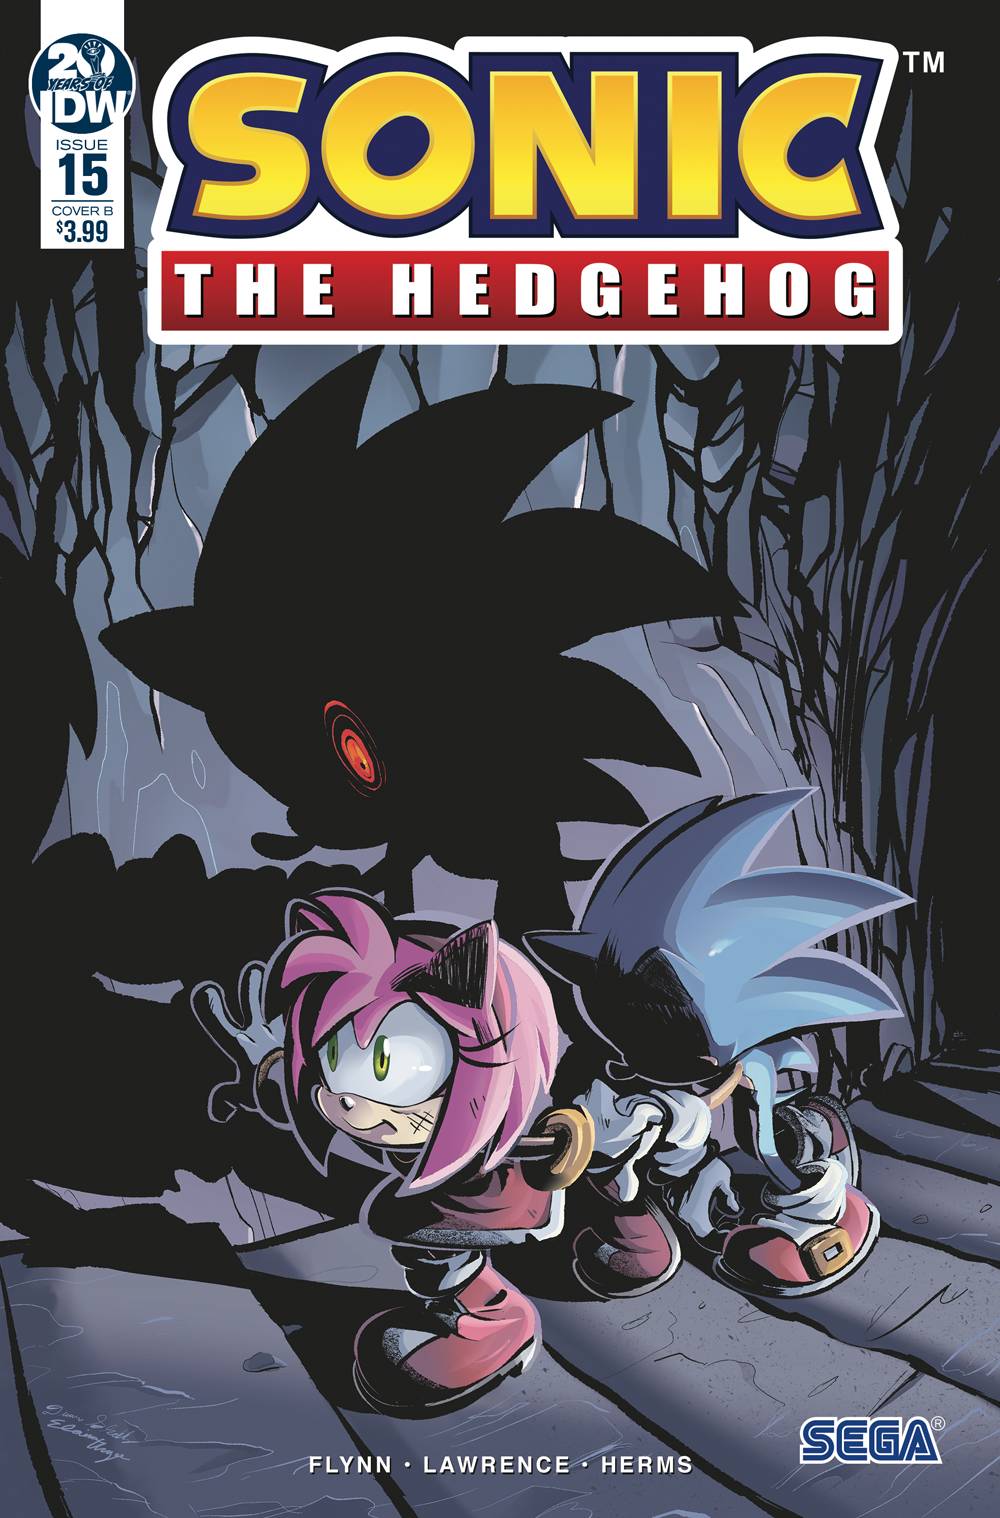 Sonic The Hedgehog #15 Cover B (Skelly) [2019]